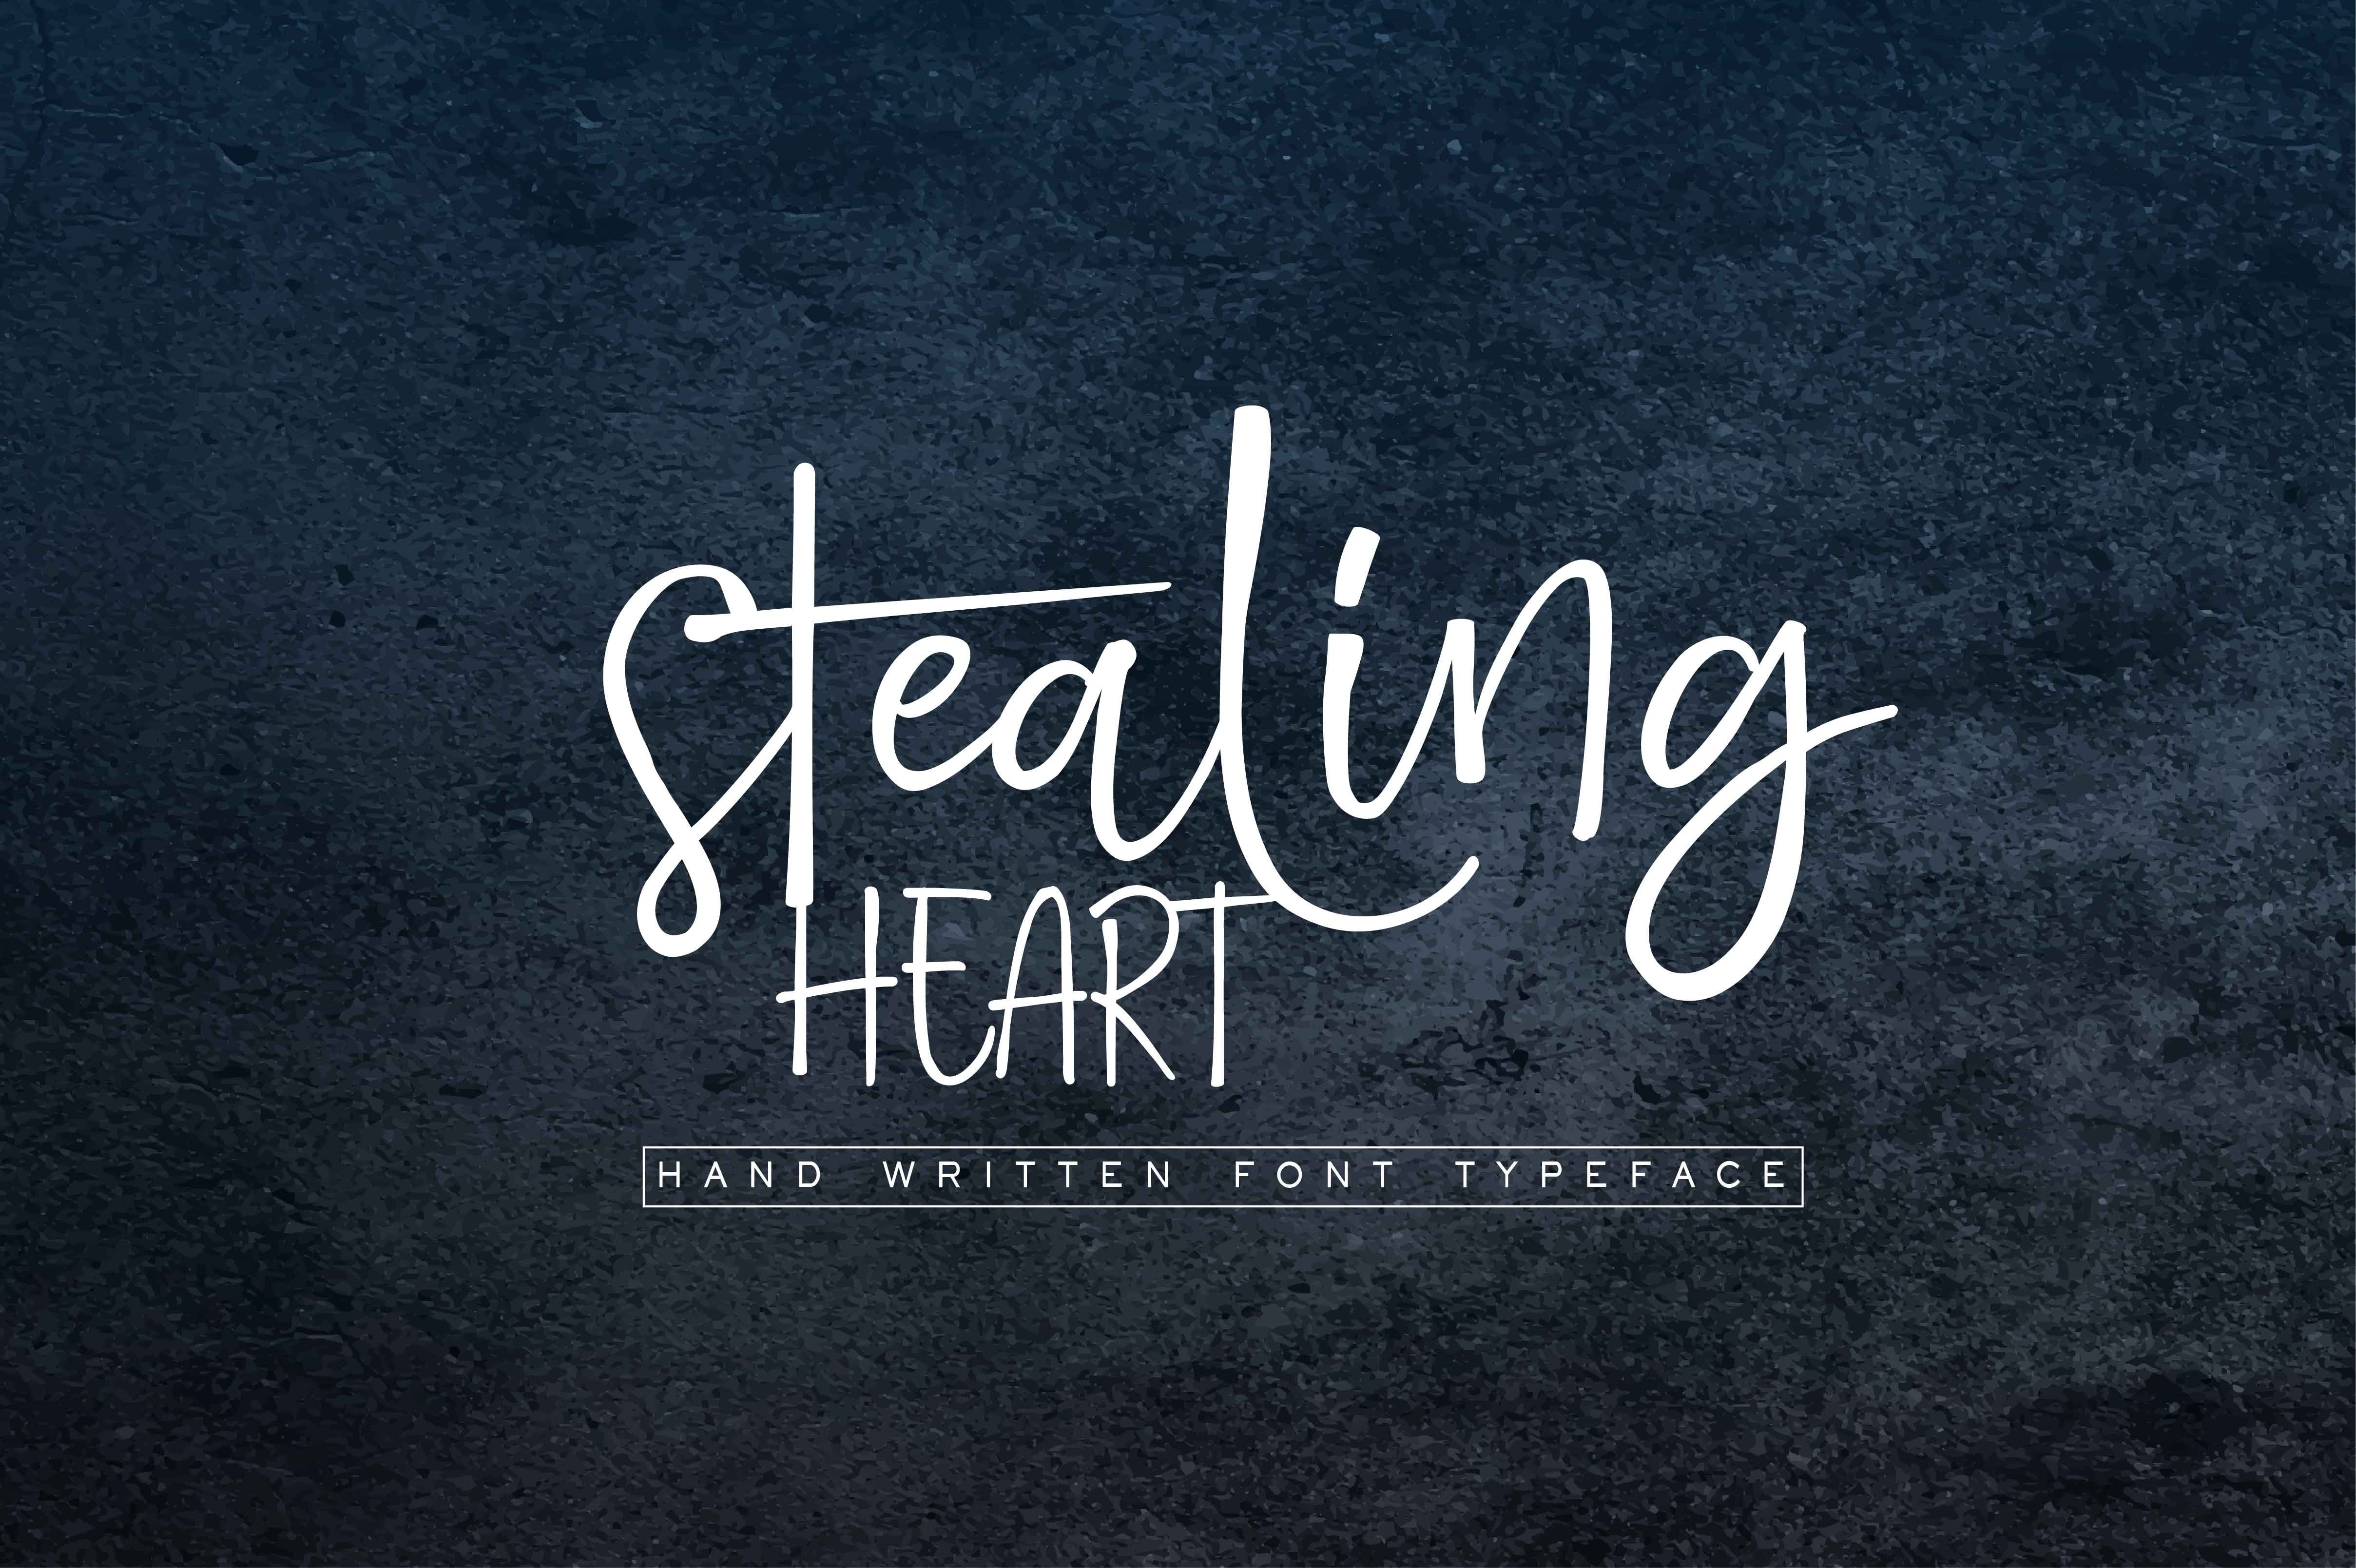 STEALING HEART Script cover image.